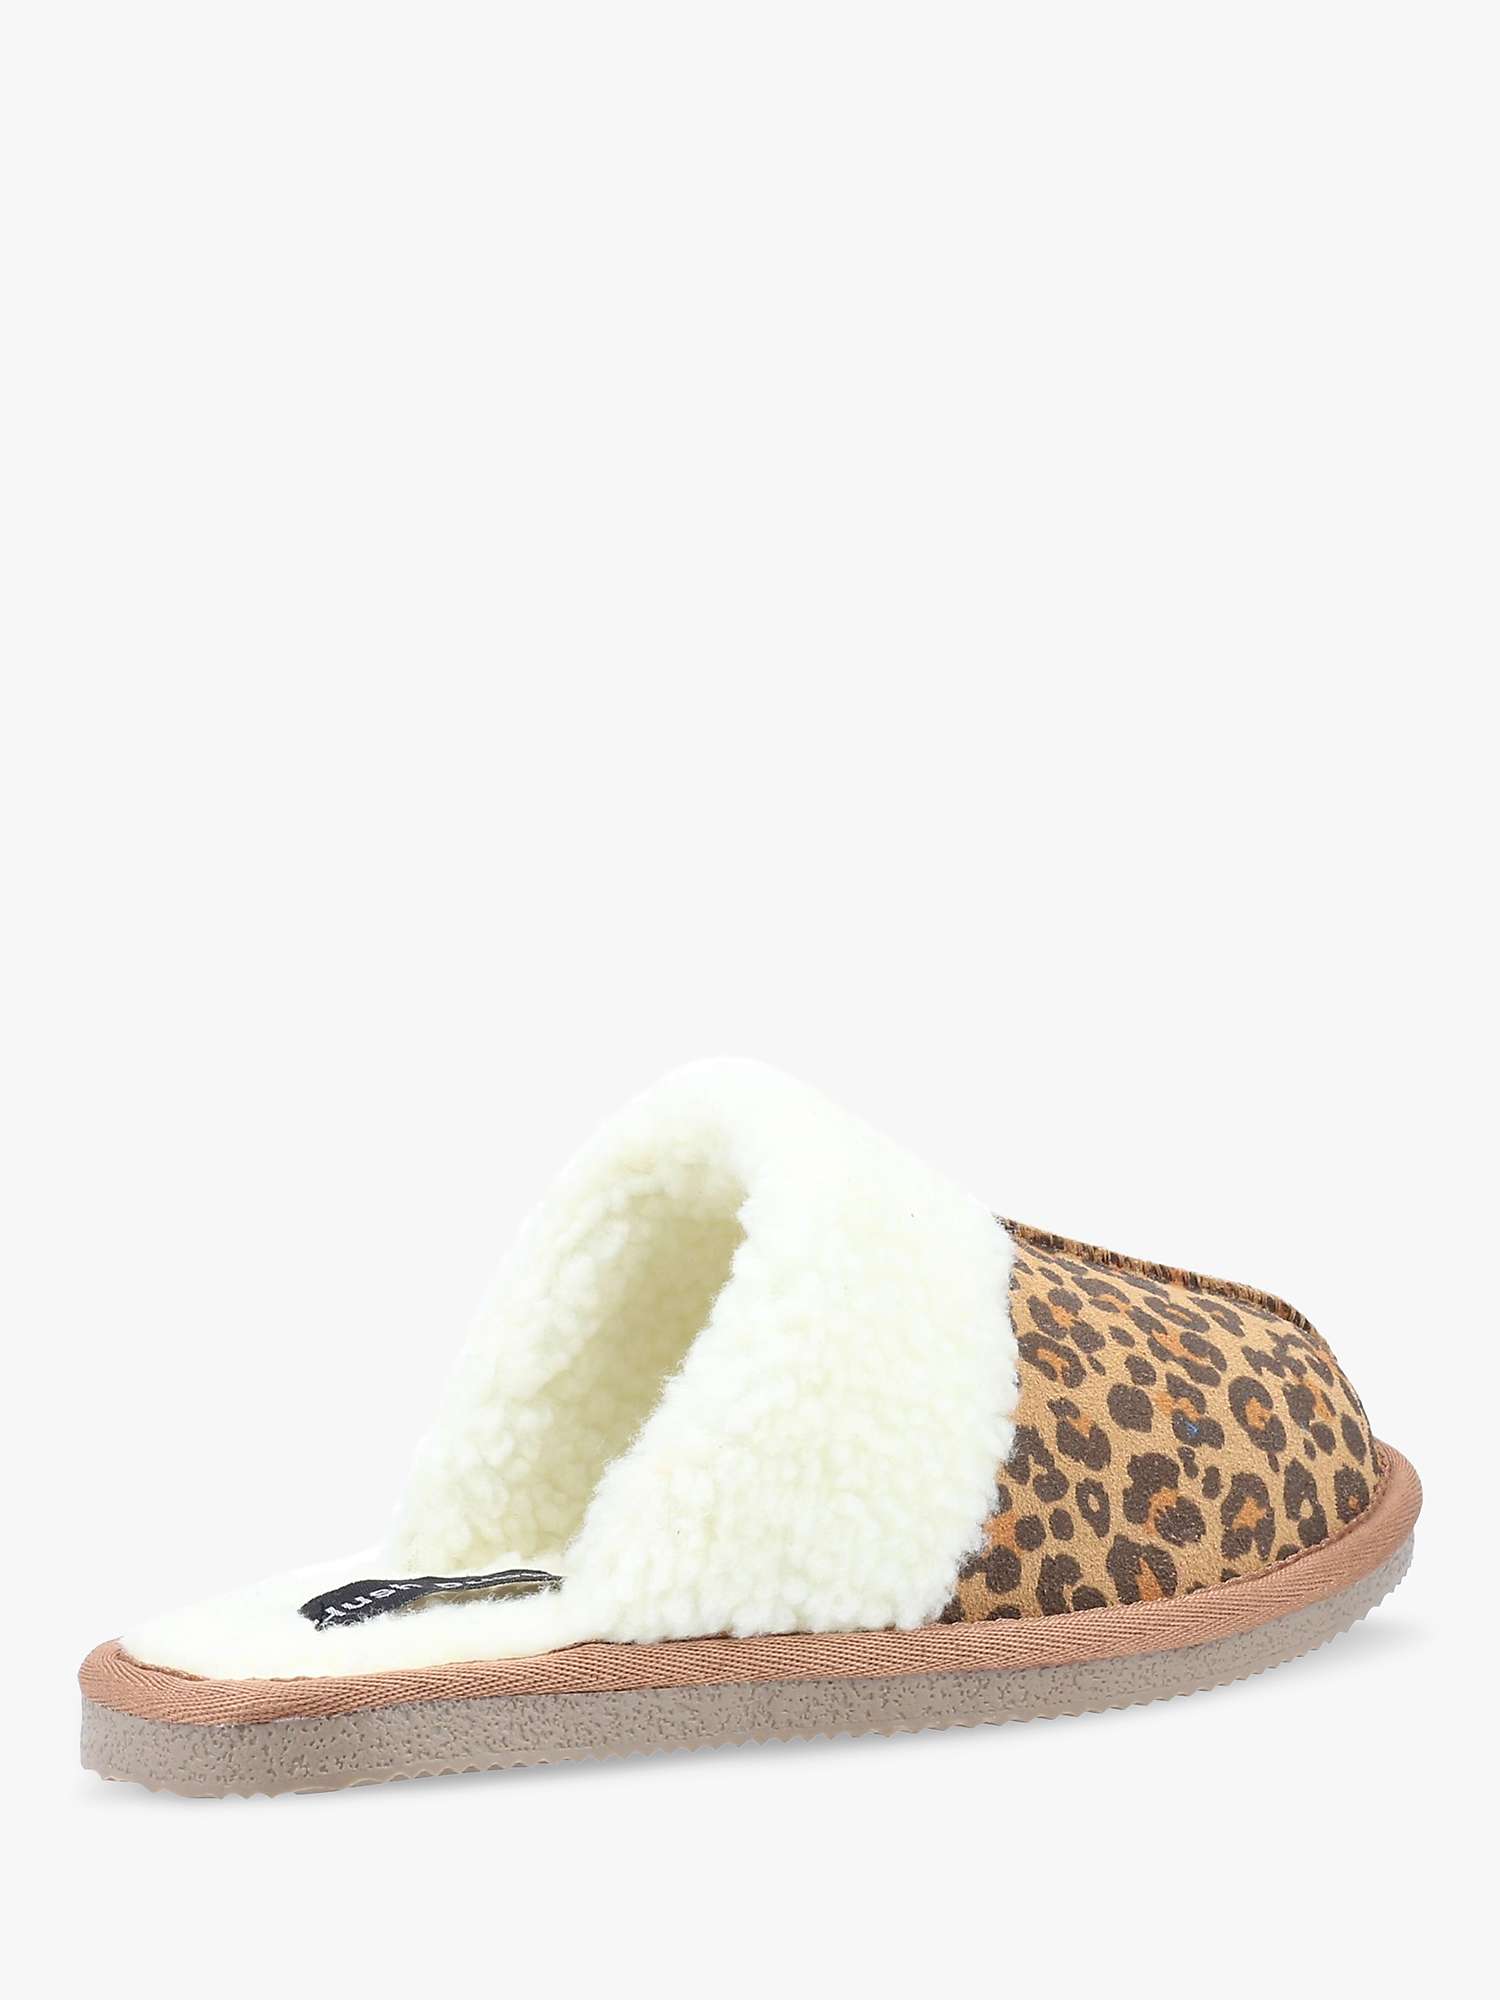 Buy Hush Puppies Arianna Leopard Print Mule Slippers, Multi Online at johnlewis.com